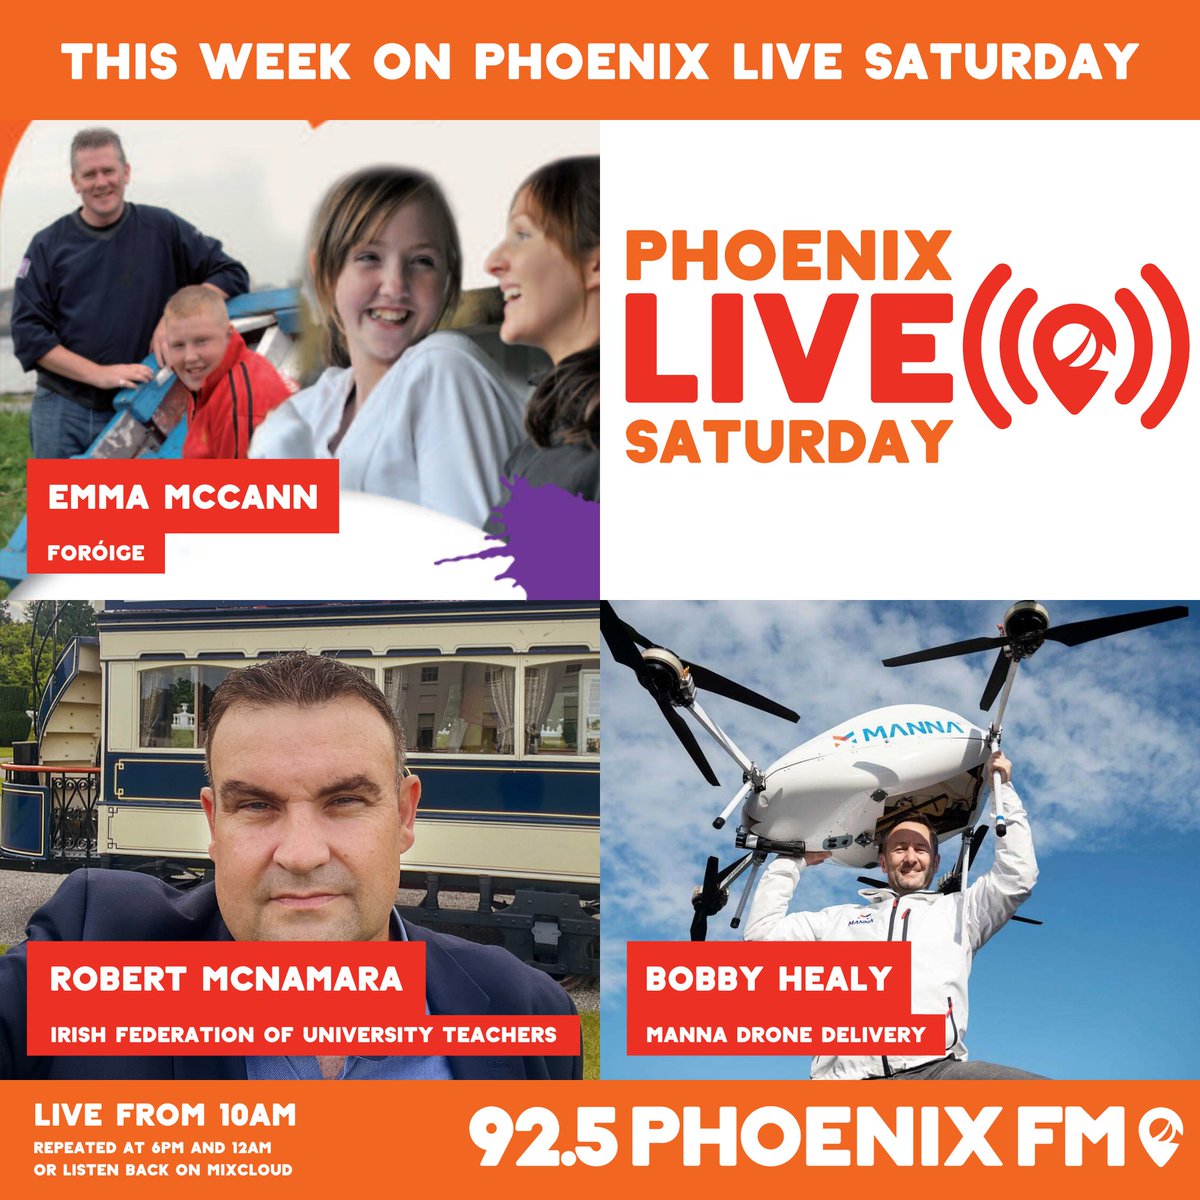 On this week's Phoenix Live Saturday with Eva and David: - Emma McCann on @foroige's Big Brother Big Sister programme - Robert McNamara - Bobby Healy at Manna Drone Delivery Tune in from 10am on 92.5 FM and online at live.phoenixfm.ie!